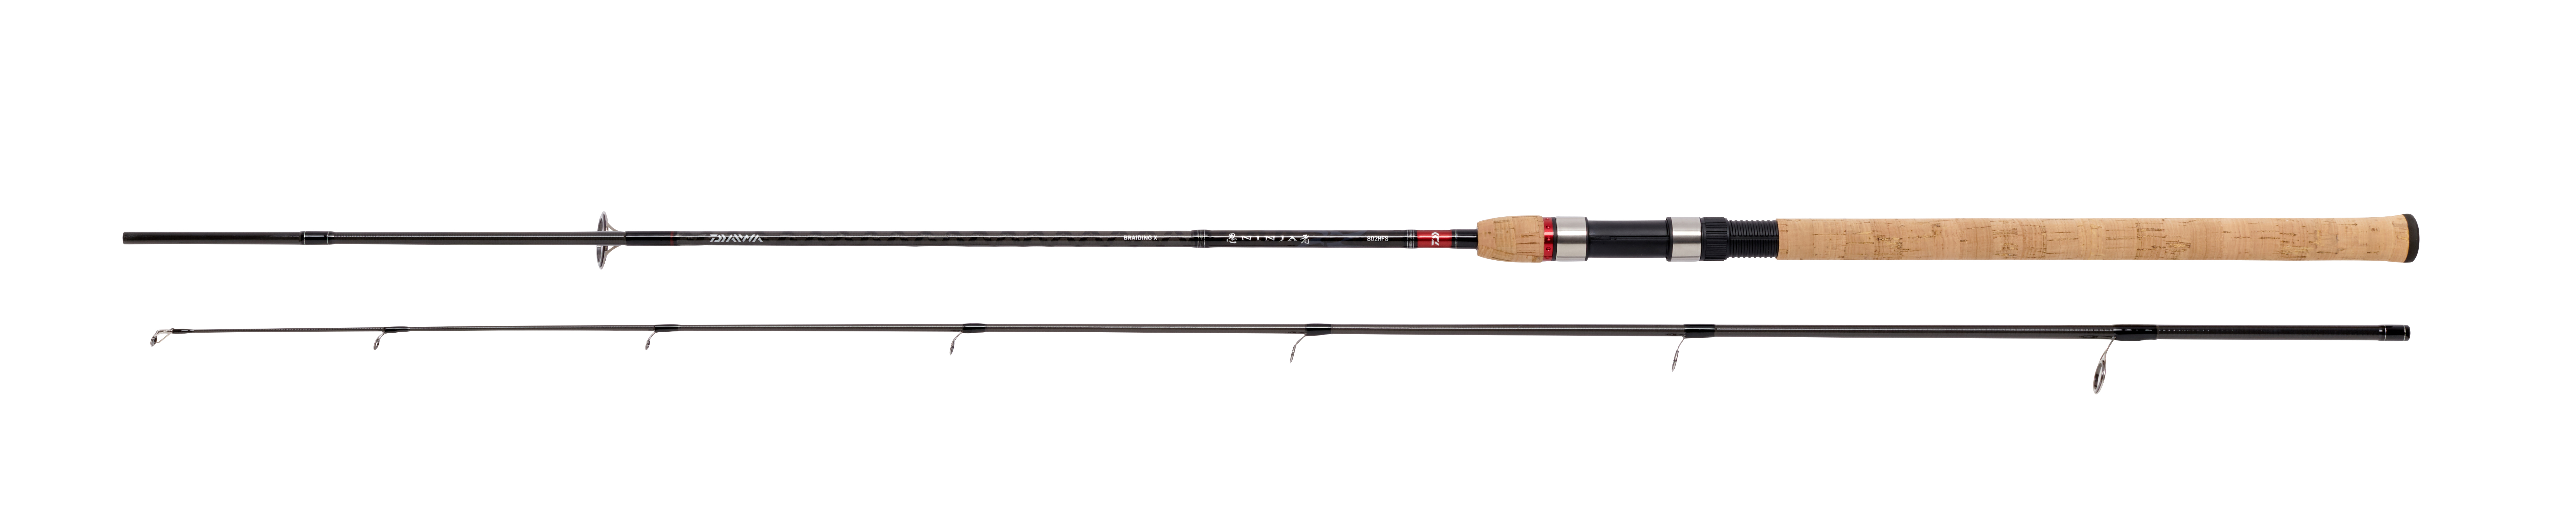 11ft All Models Available New Daiwa Ninja Spinning Fishing Rods 7ft 